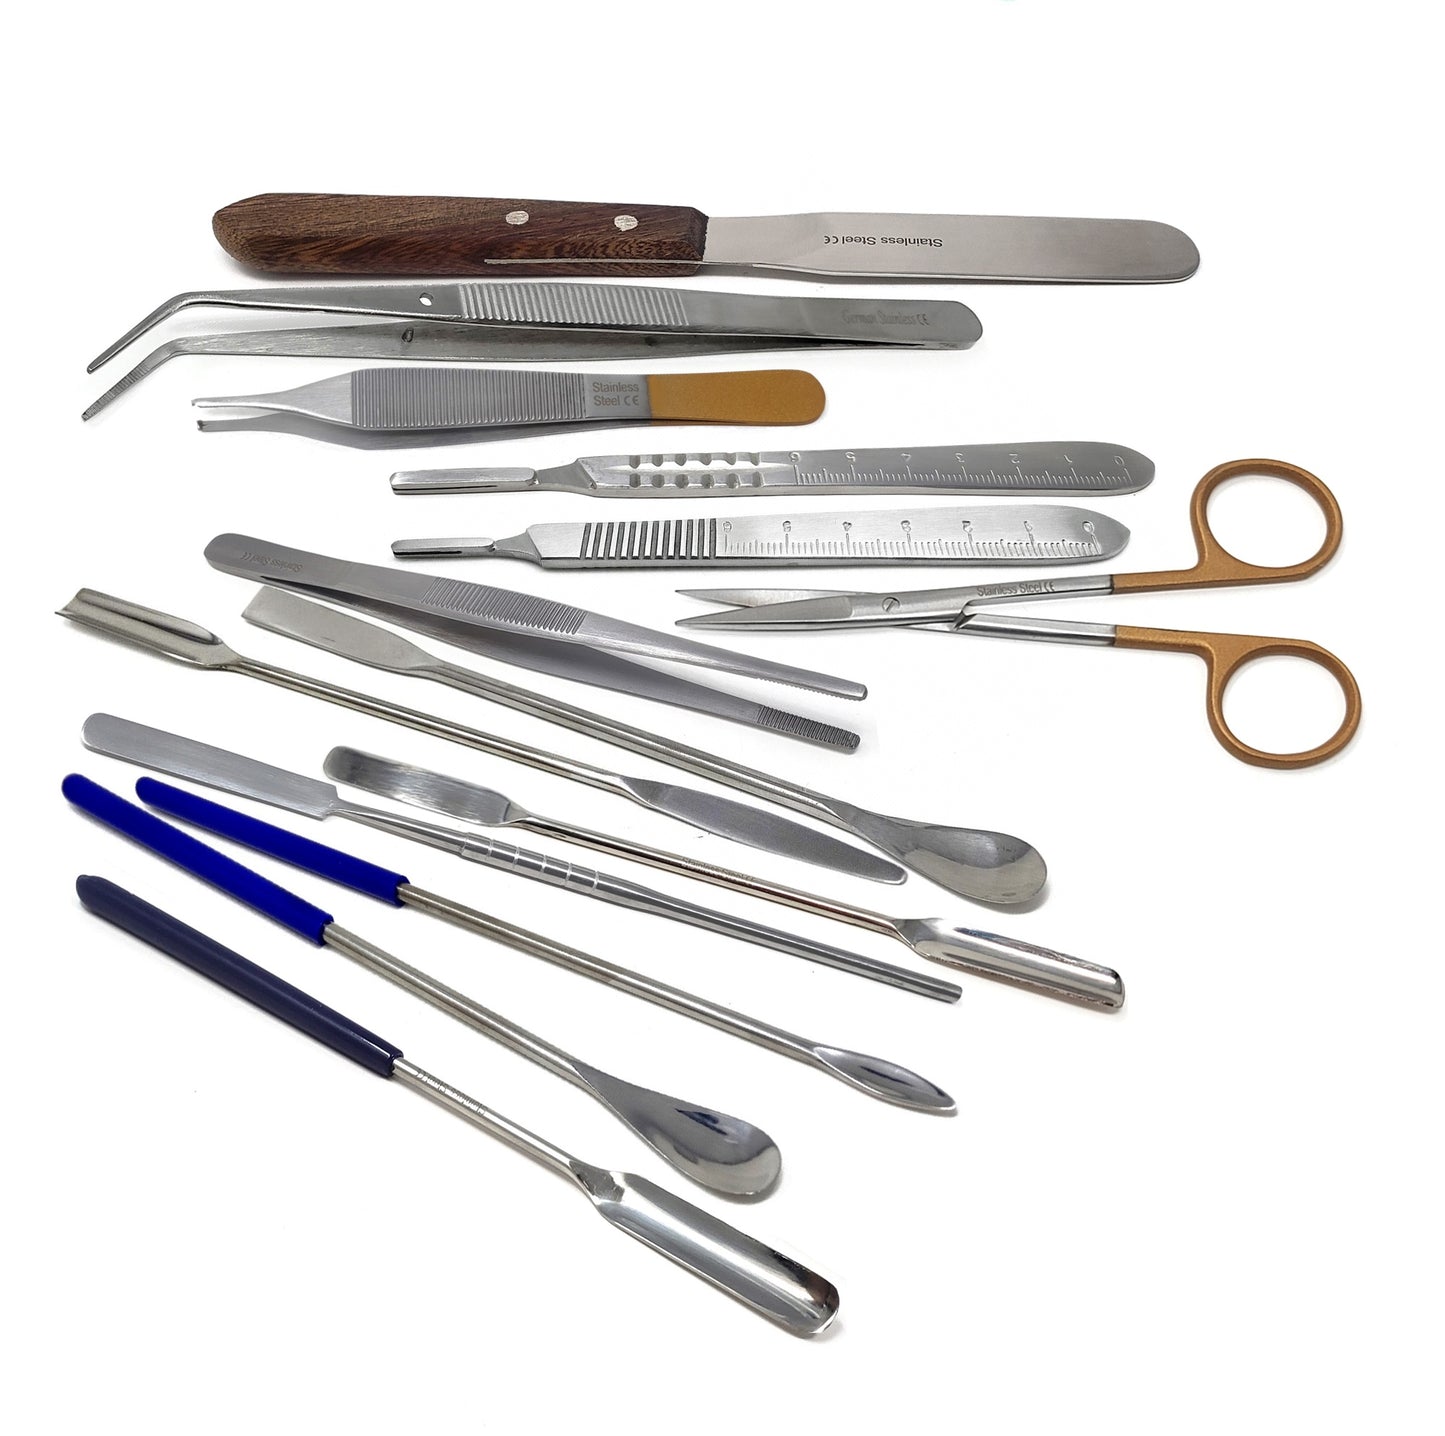 Lab Starter Kit with Stainless Spatulas, Forceps, Dissecting Scissors & Scalpels - 14 Pcs Edition